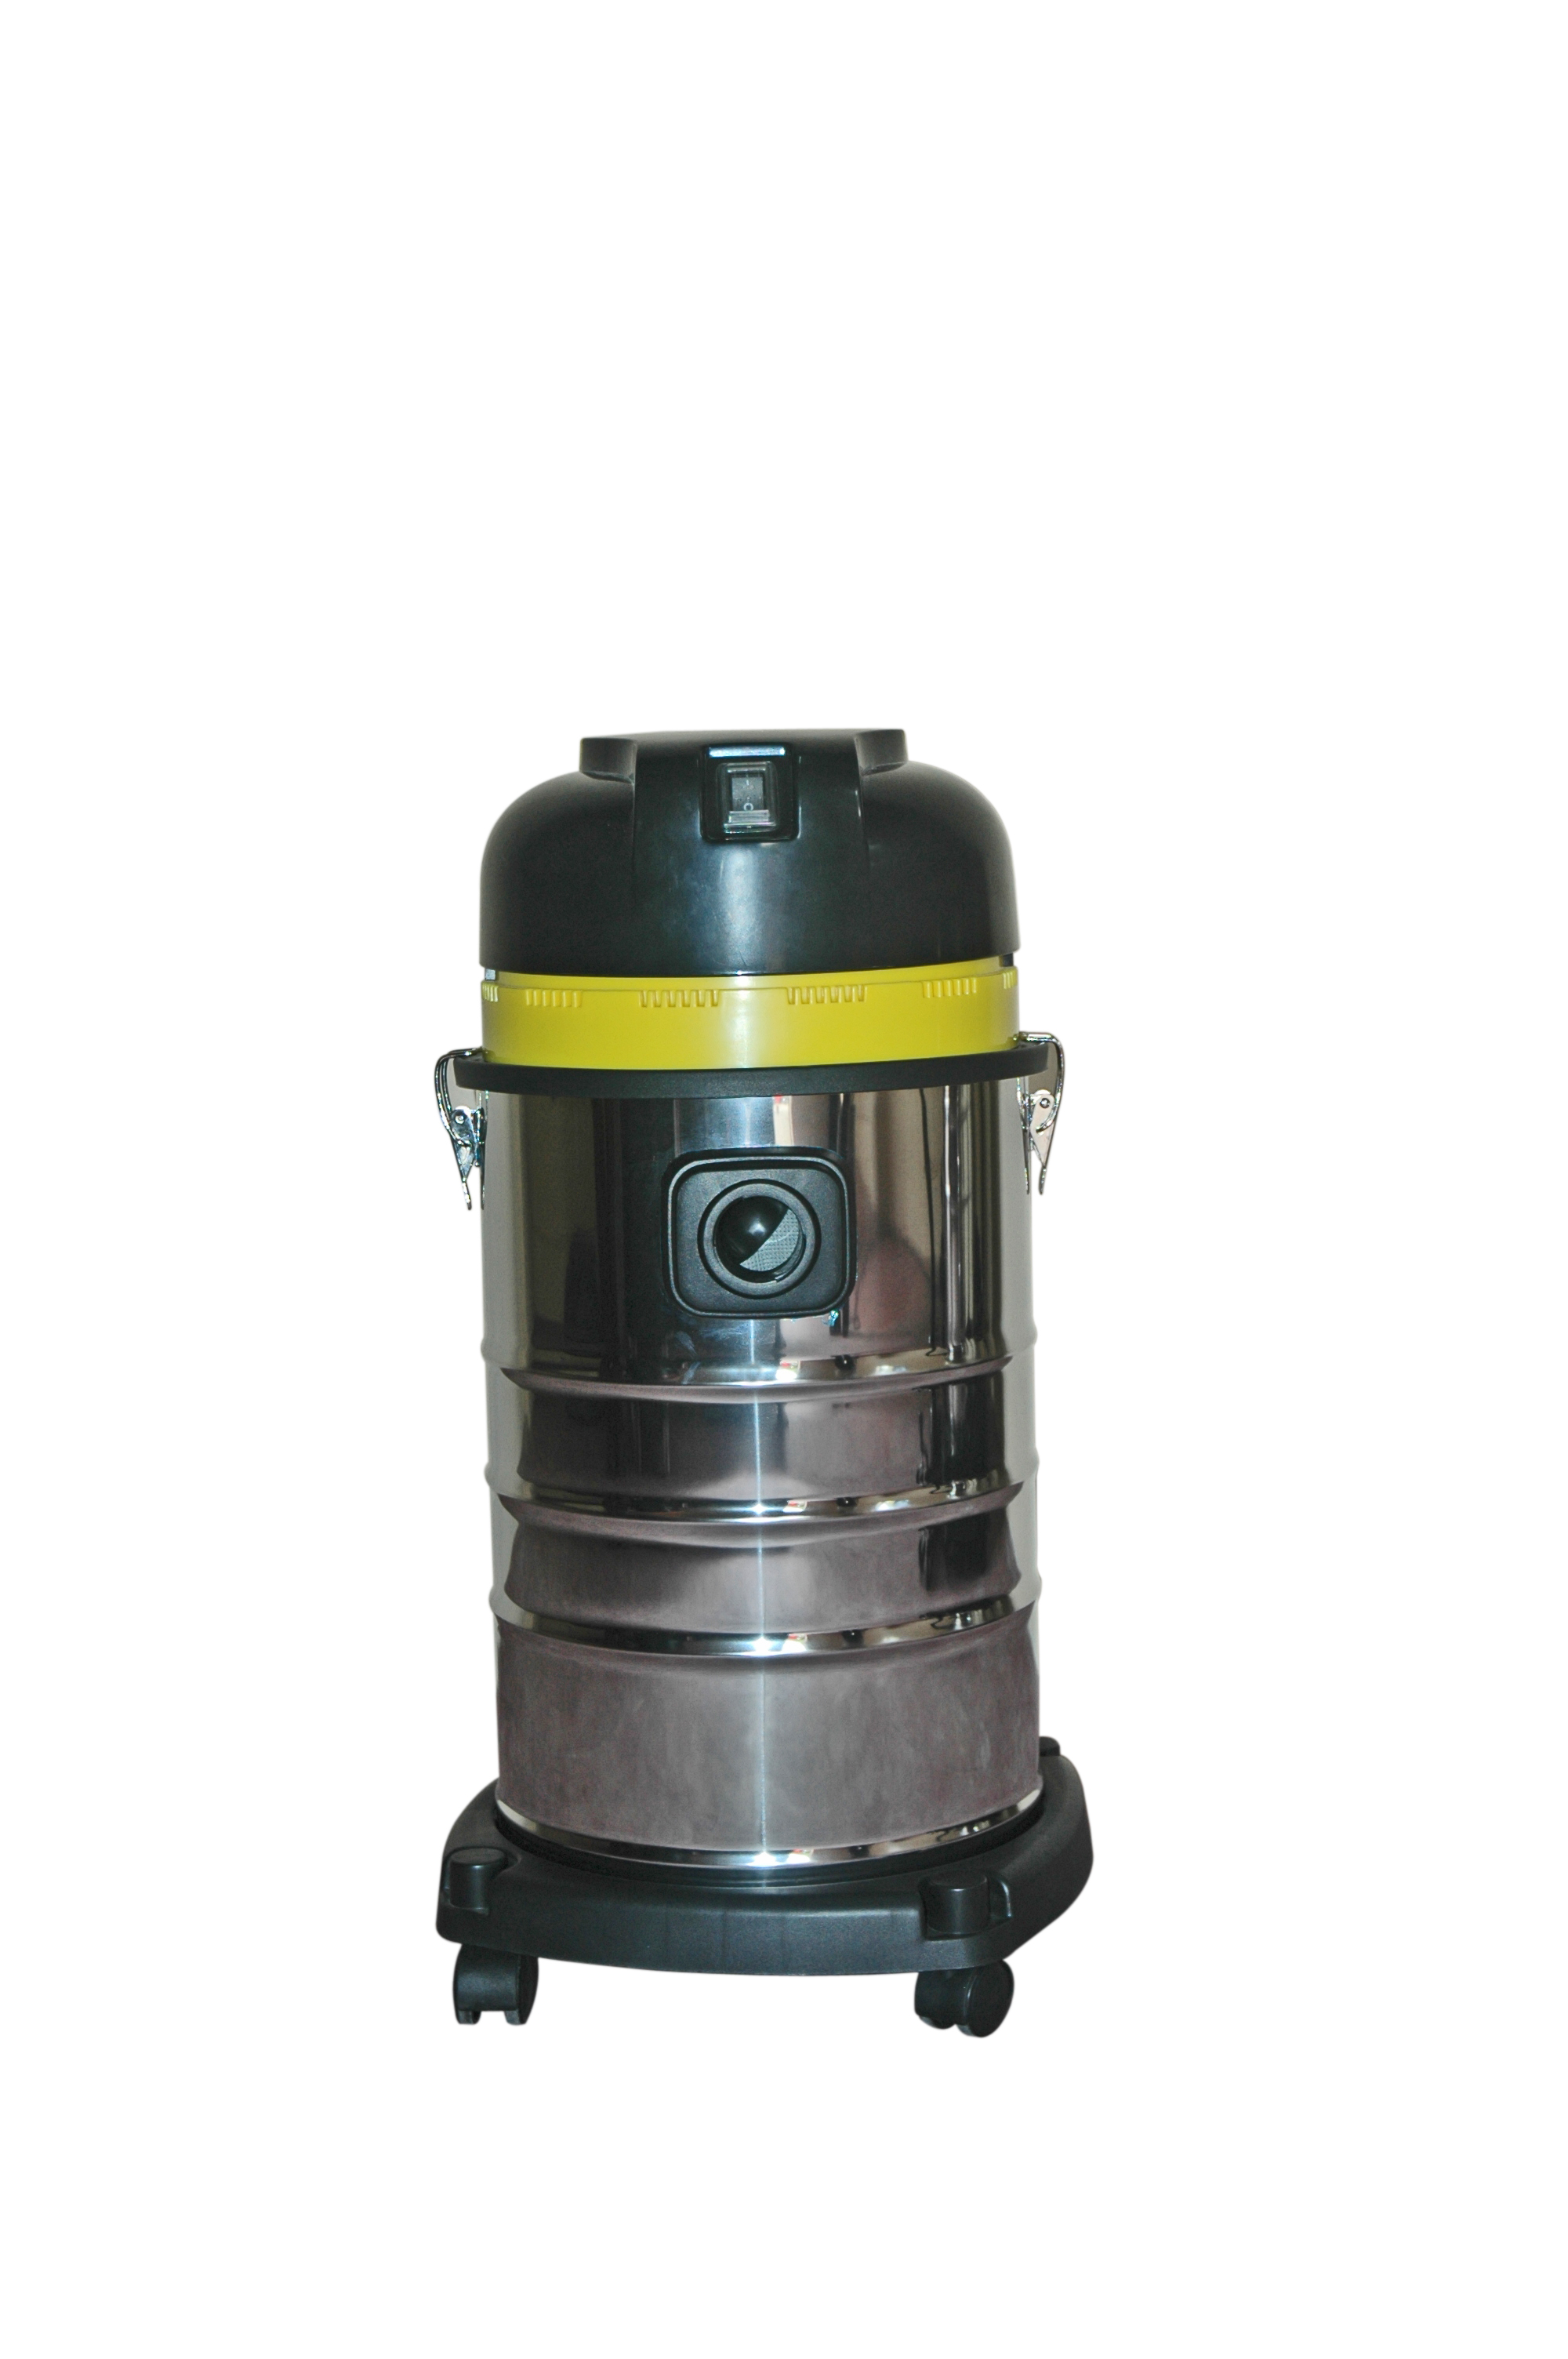 Single phase vacuum cleaners